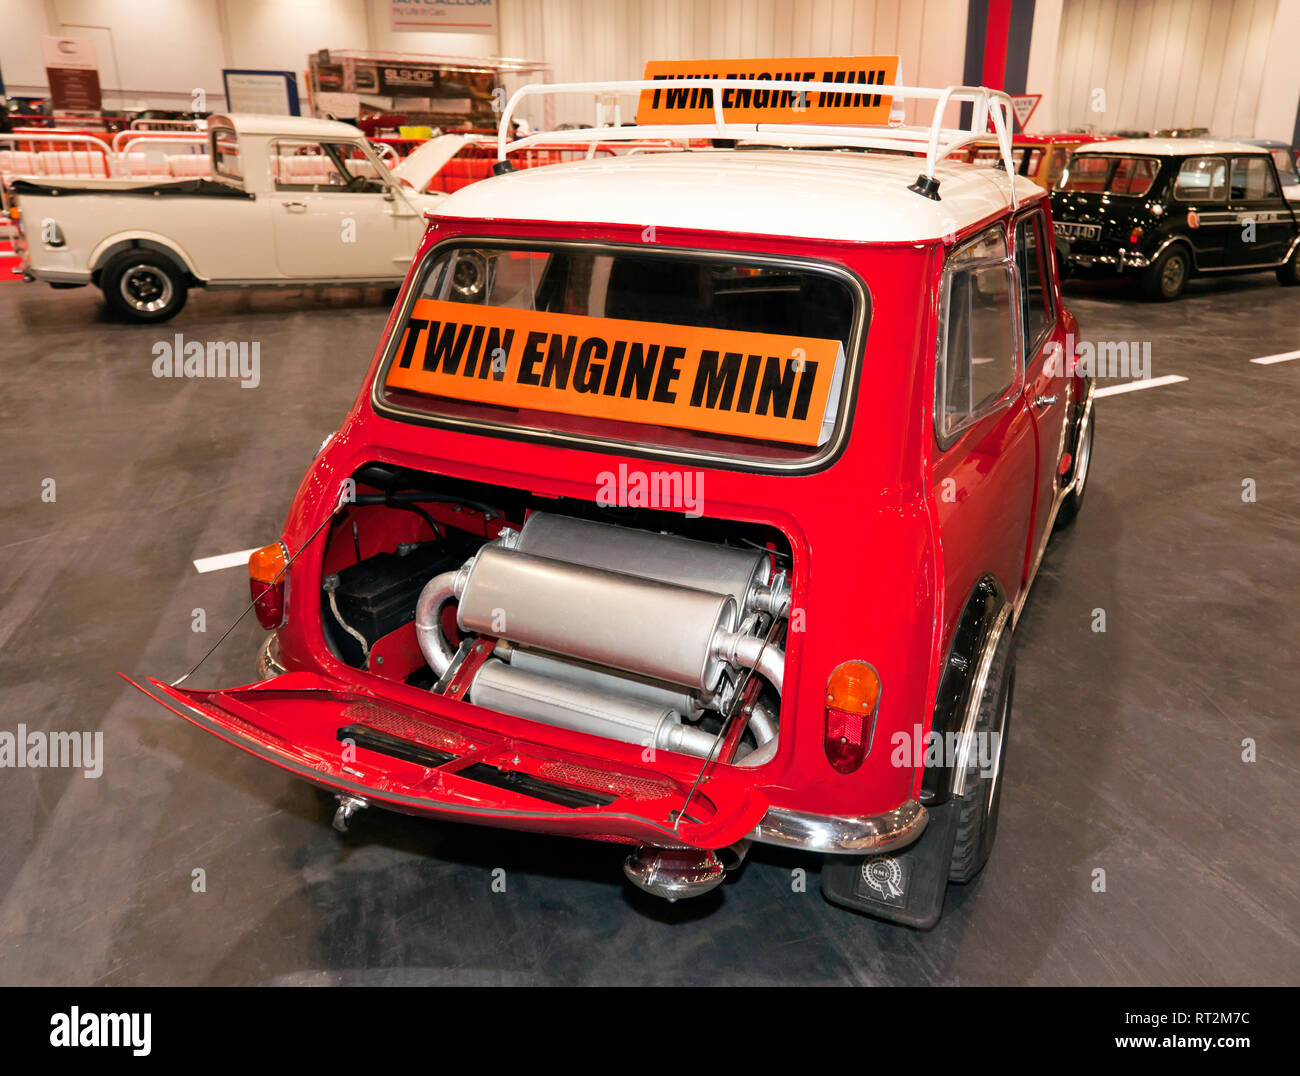 Rear view of a 1965, Twin-engine, Austin Mini Cooper S, on display at the 2019 London Classic Car Show. Showing the exhaust system in the boot. Stock Photo